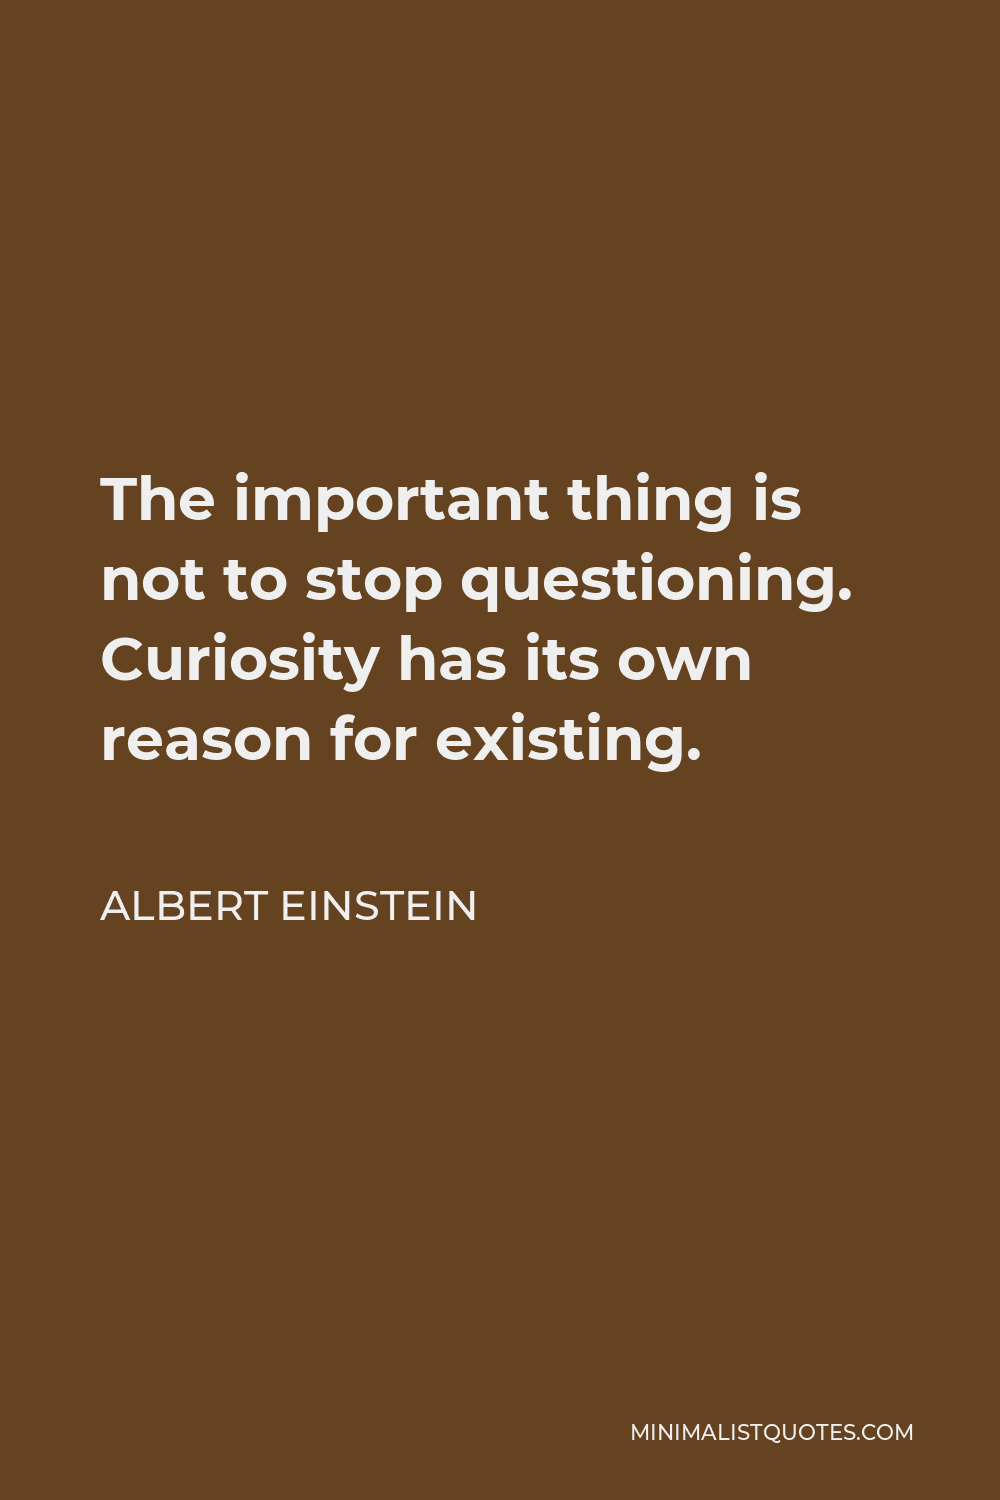 Albert Einstein Quote - The important thing is not to stop questioning. Curiosity has its own reason for existing.